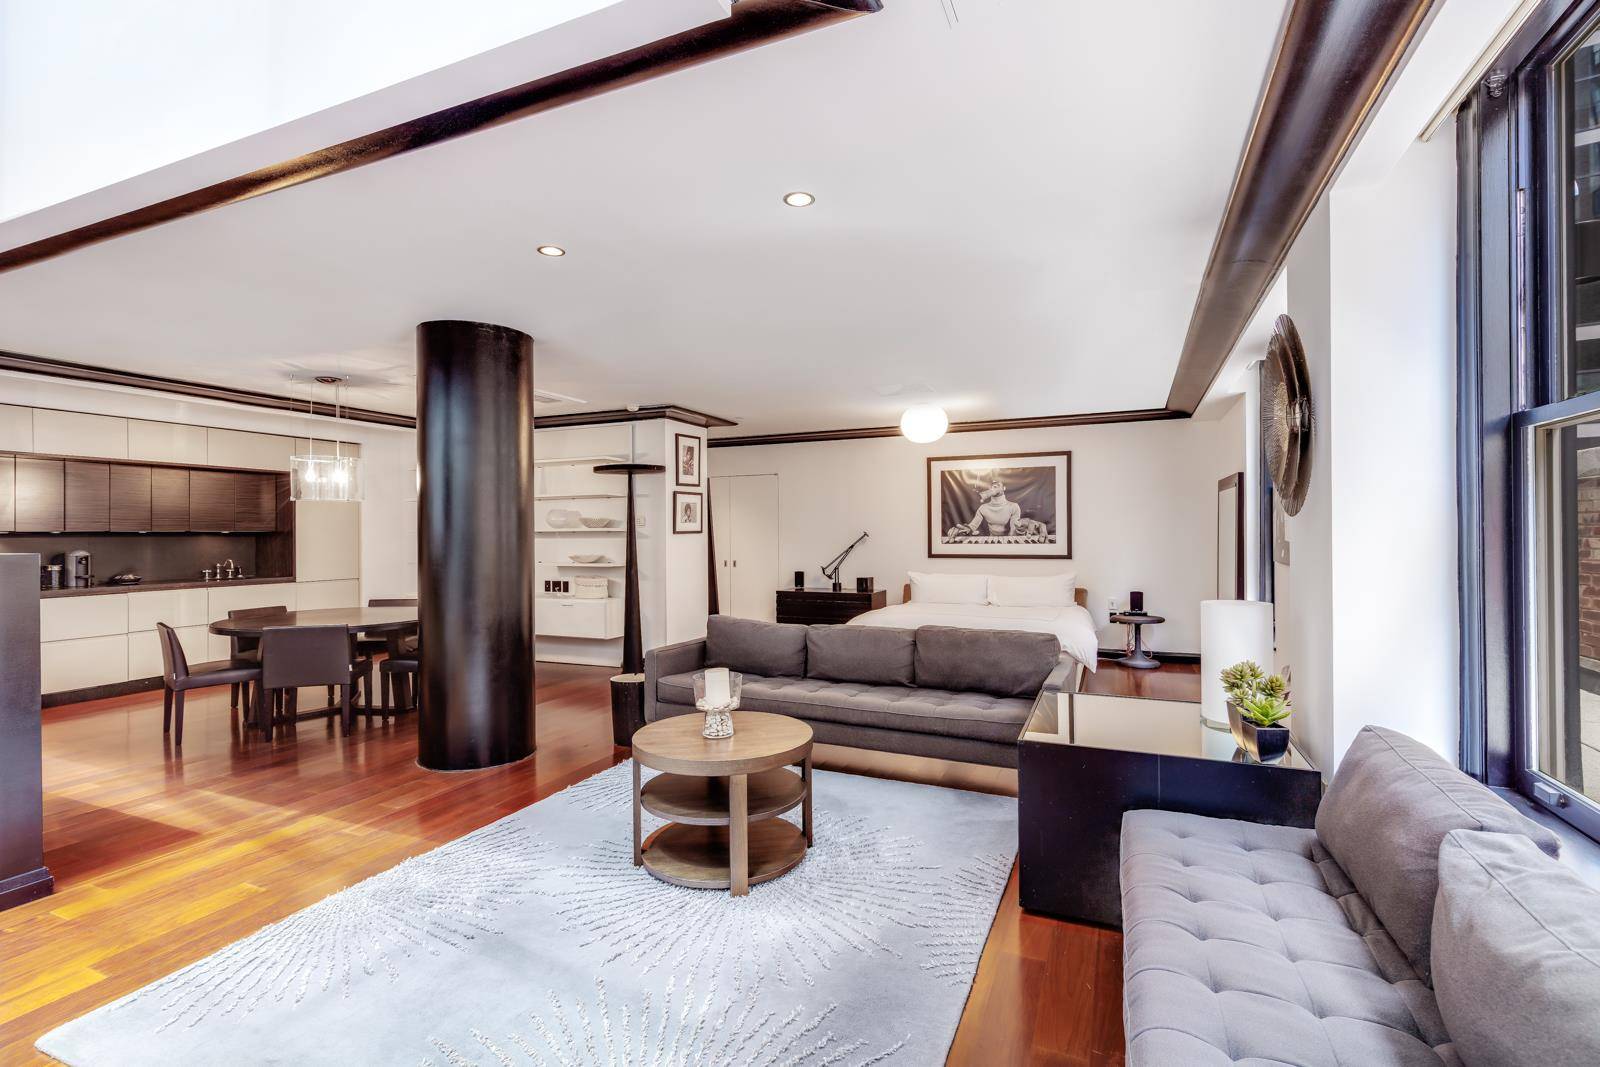 Rare Loft Duplex Penthouse with 2 Private Terraces Radiant Skylight One of the Financial Districts hidden secrets in the premiere pre war ultra service building !